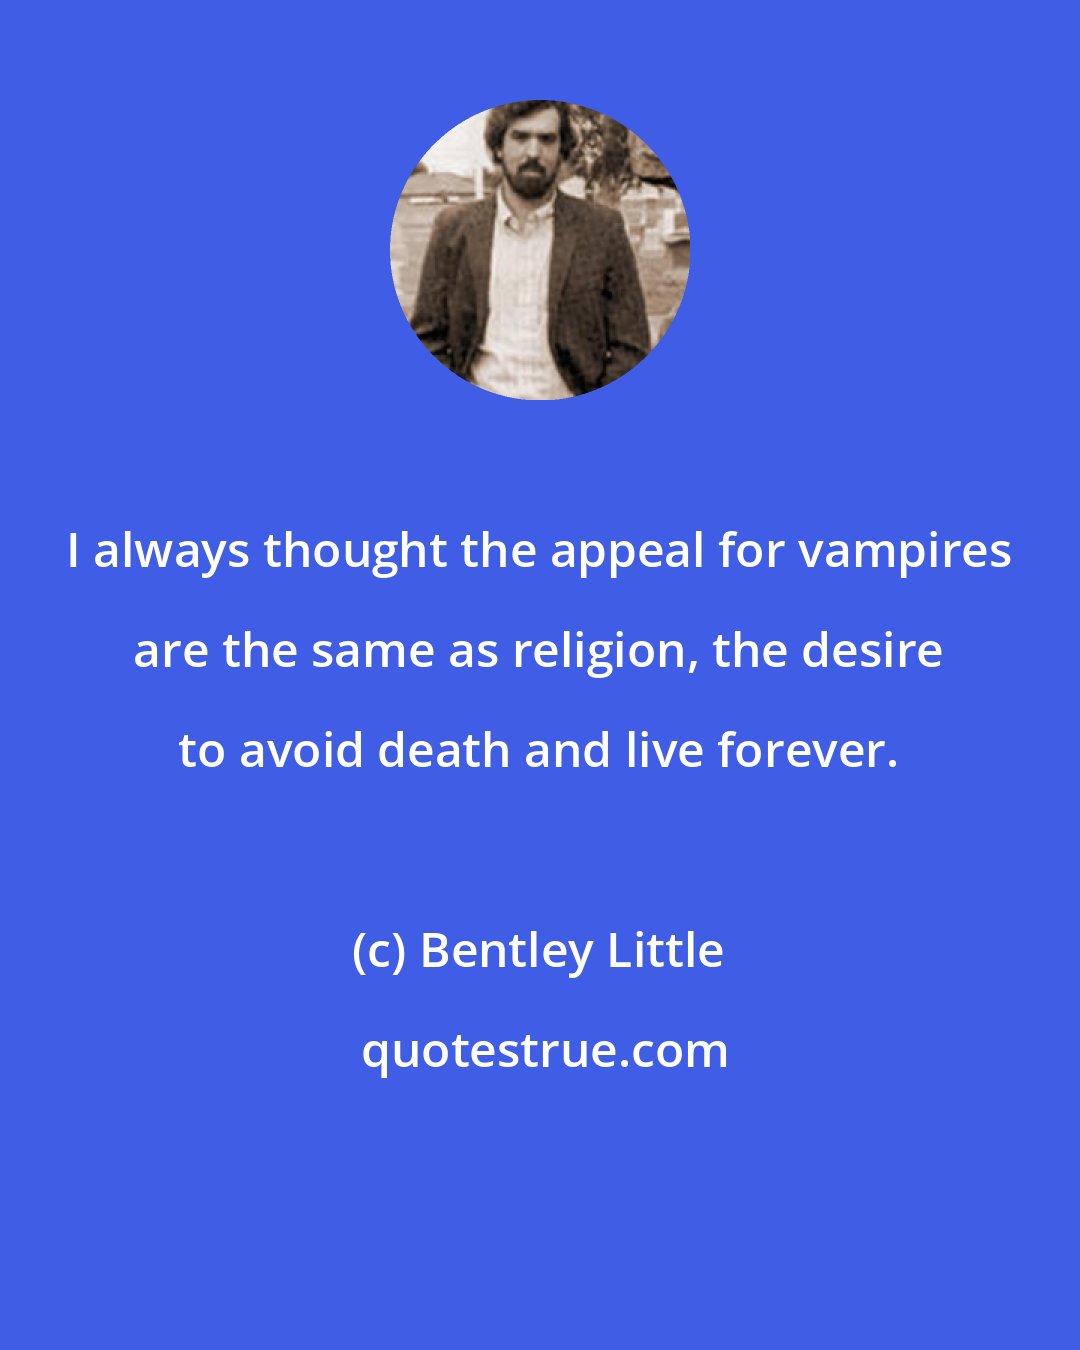 Bentley Little: I always thought the appeal for vampires are the same as religion, the desire to avoid death and live forever.